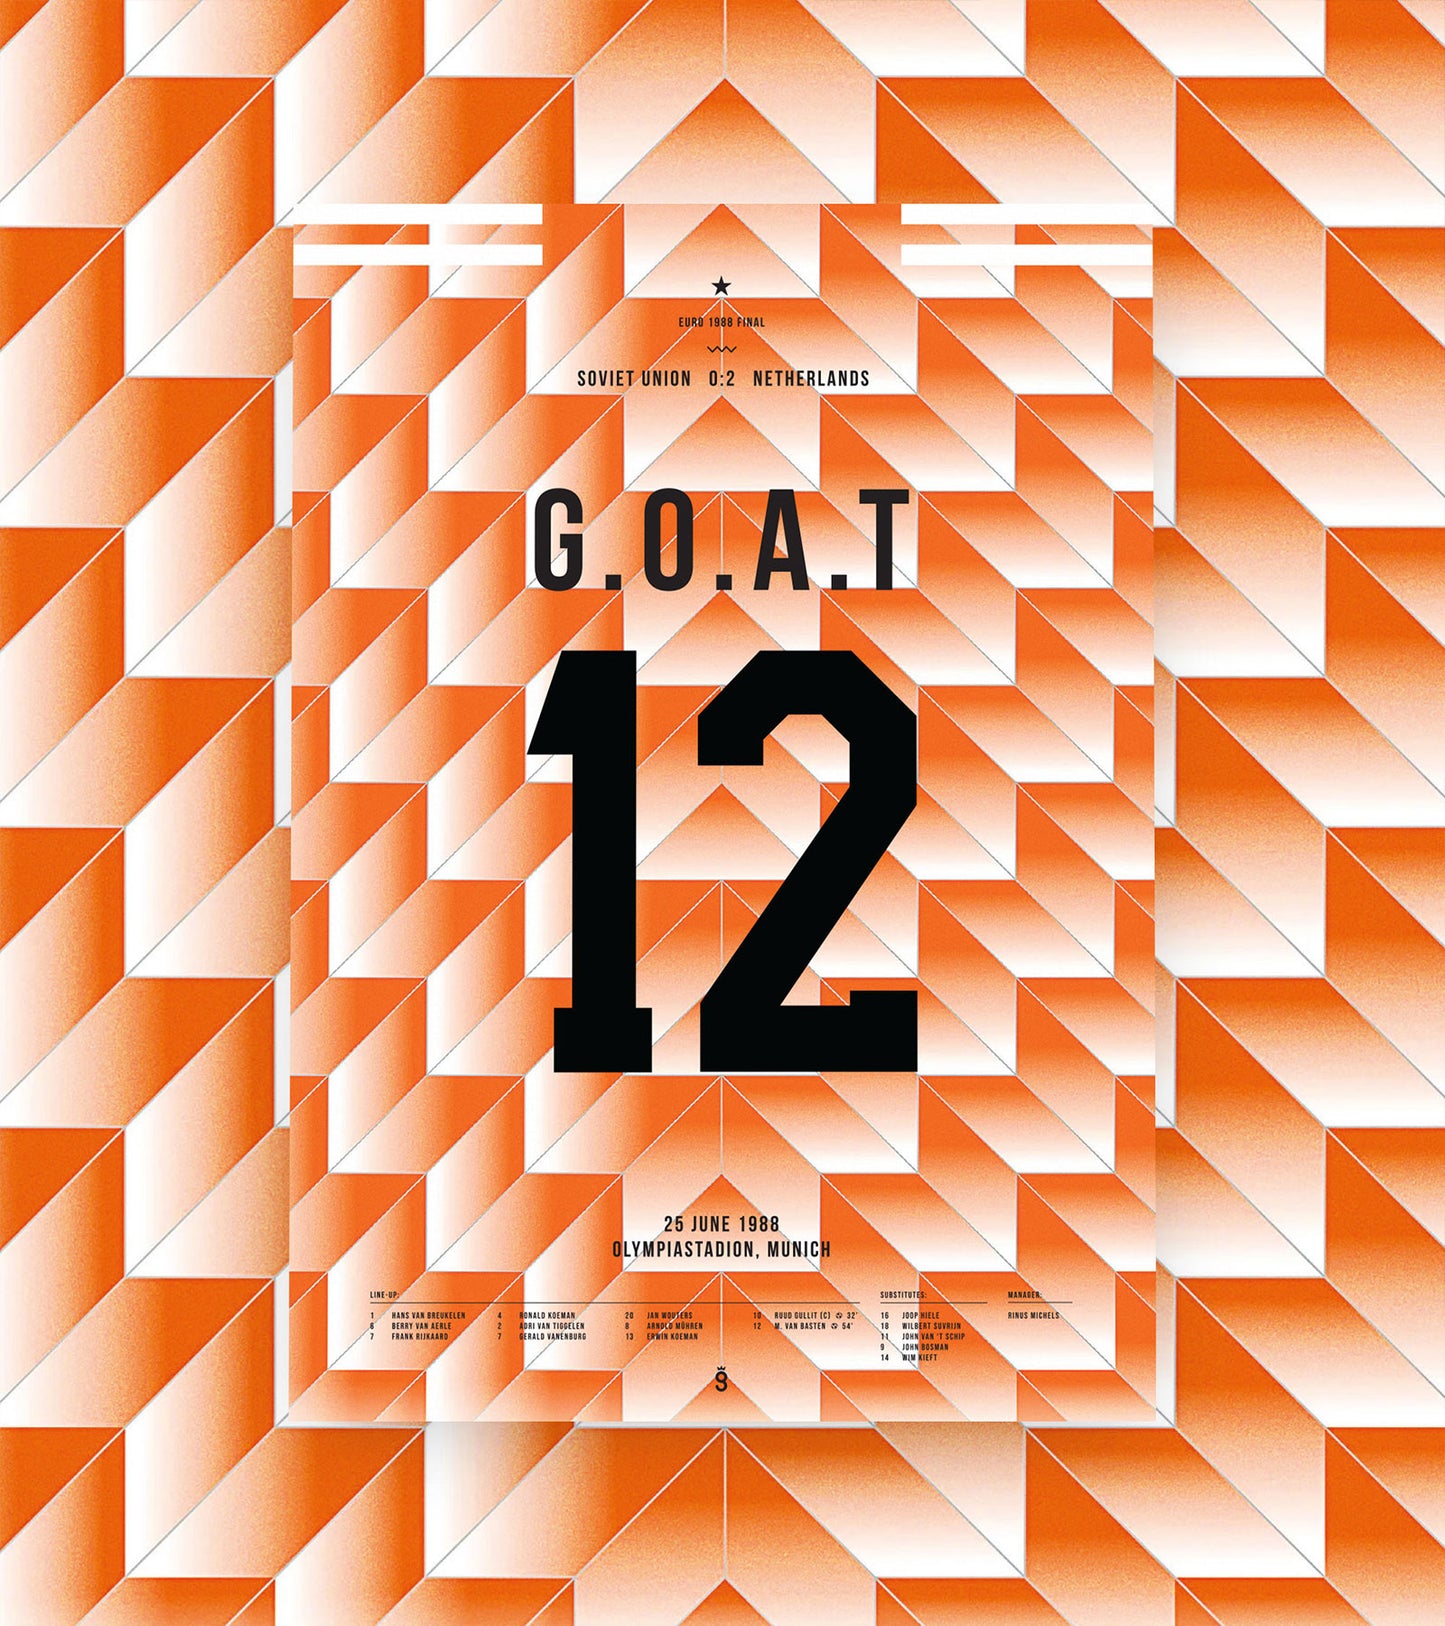 The Day that Van Basten Became one of the G.O.A.T.